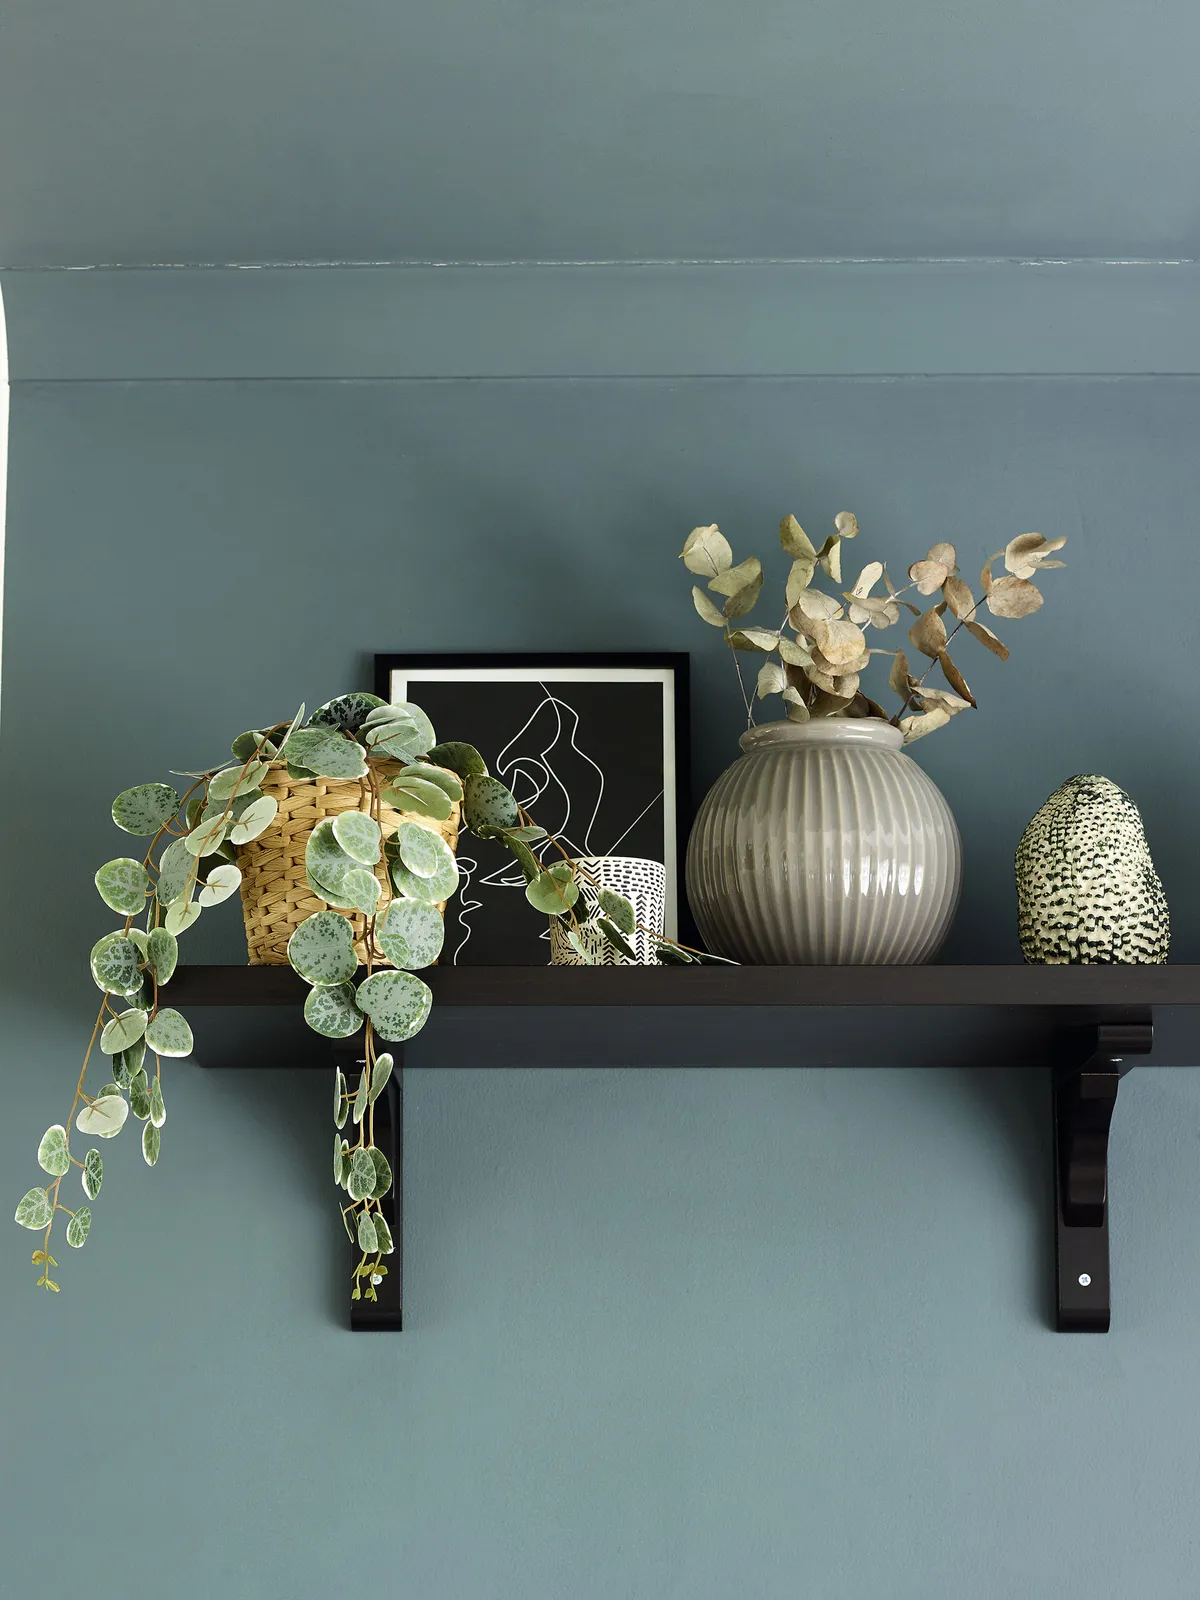 ‘Before starting, I planned out exactly what I wanted to do to this room,’ explains Nina. To draw attention to her teal colour-block centrepiece and tie in with the other dark accents, she added a black shelf with vases and a print from Desenio